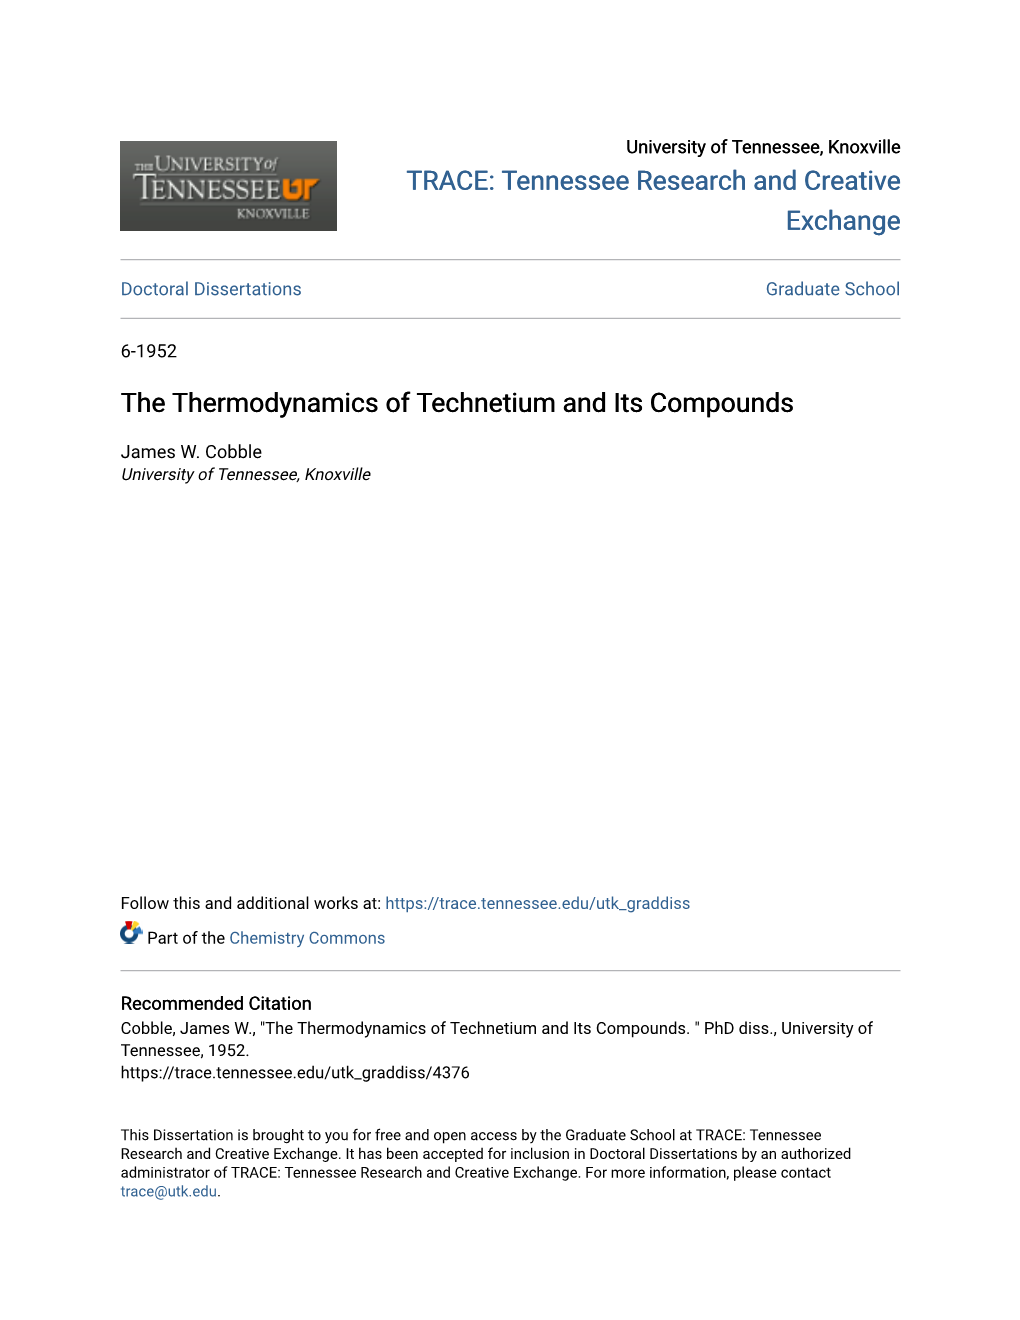 The Thermodynamics of Technetium and Its Compounds